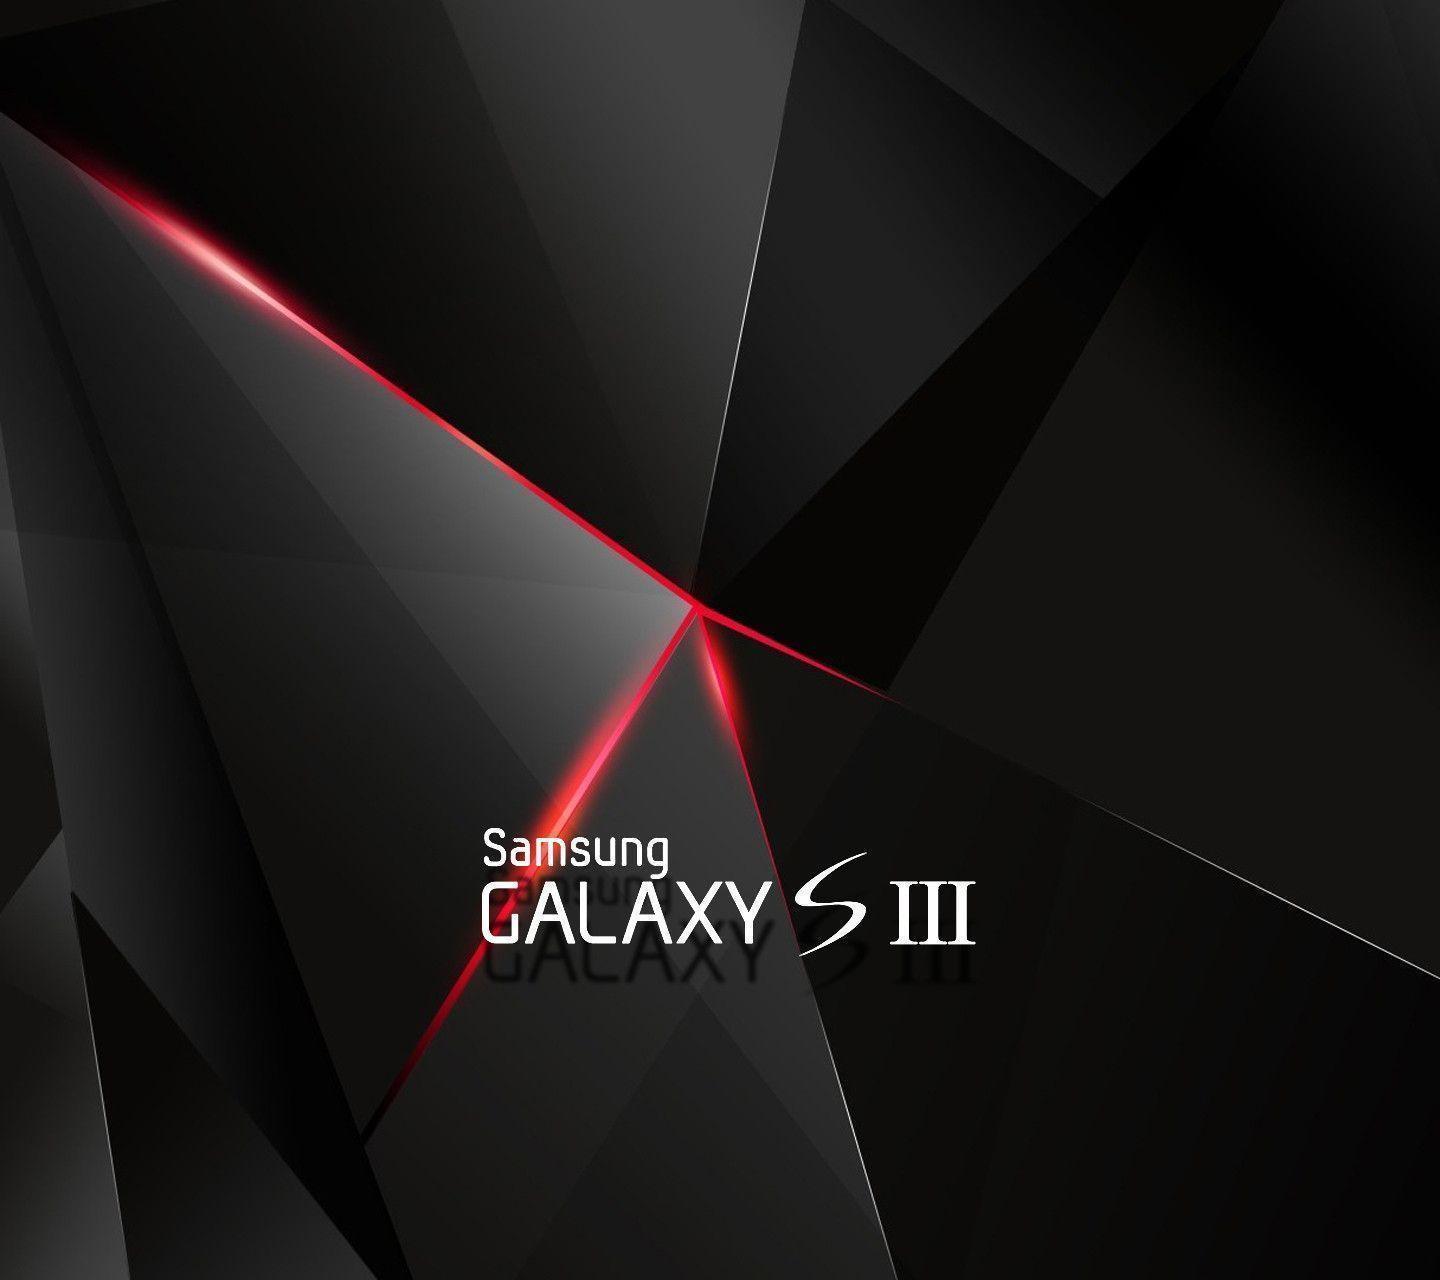 Samsung Galaxy S3 Wallpapers Space - Wallpaper Cave